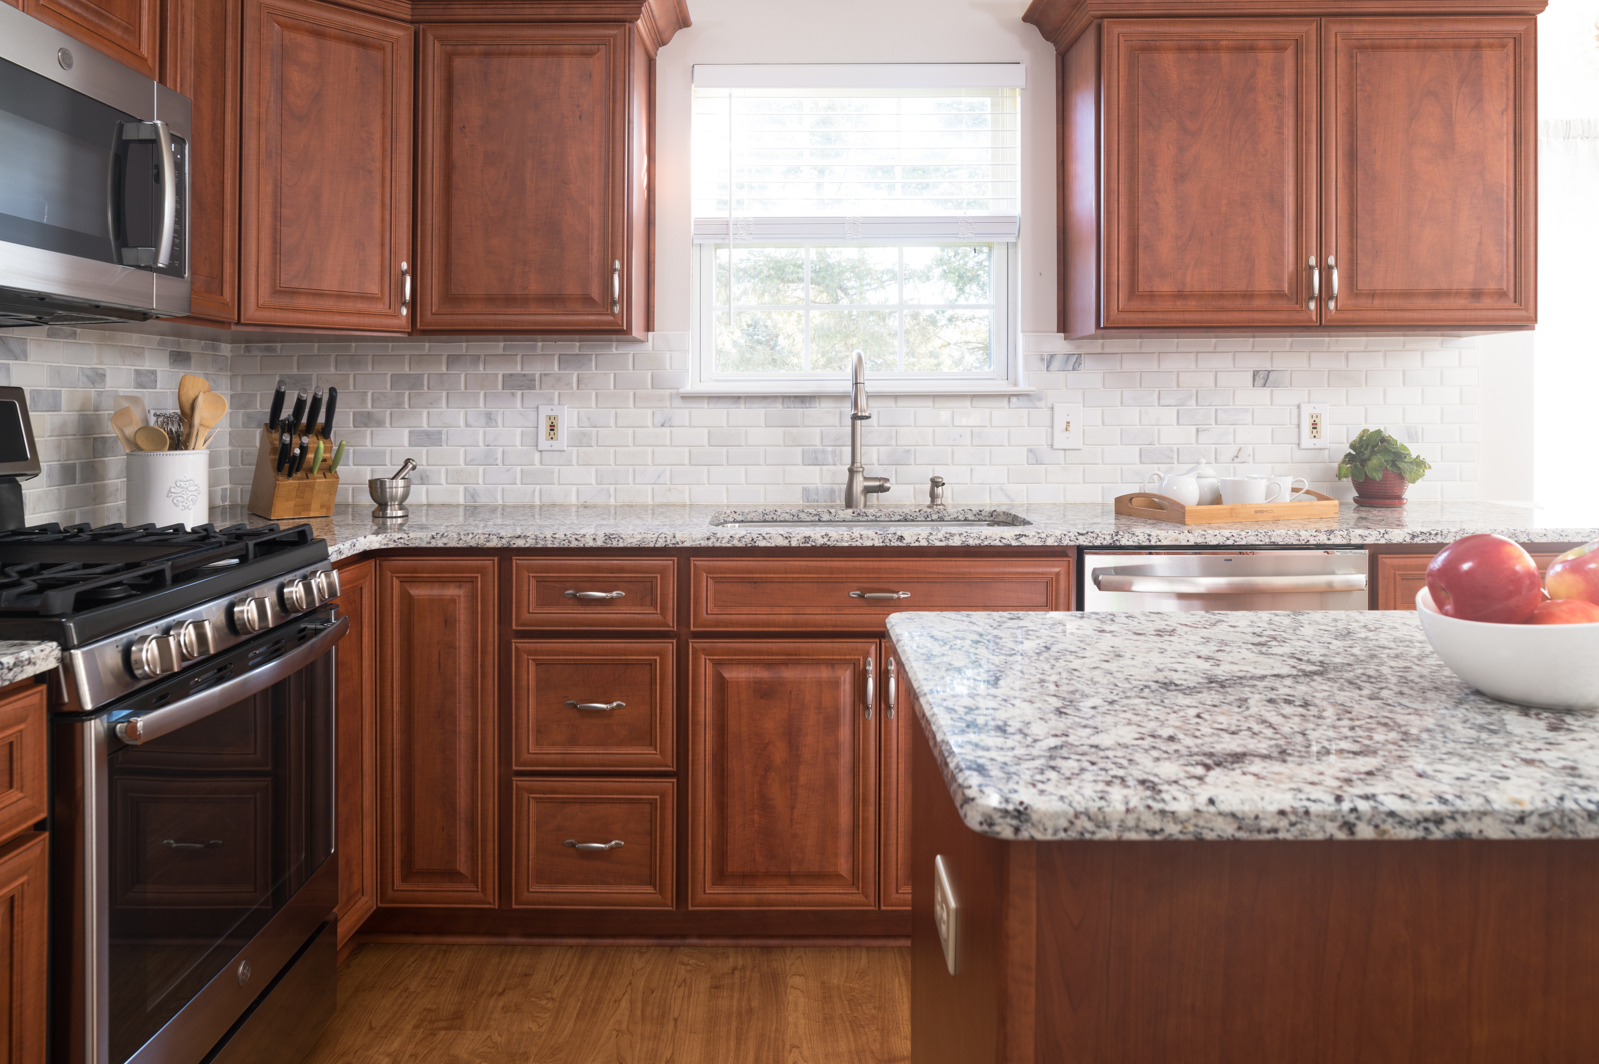 A Stunning Transitional Kitchen Makeover Featuring Cherry Cabinets